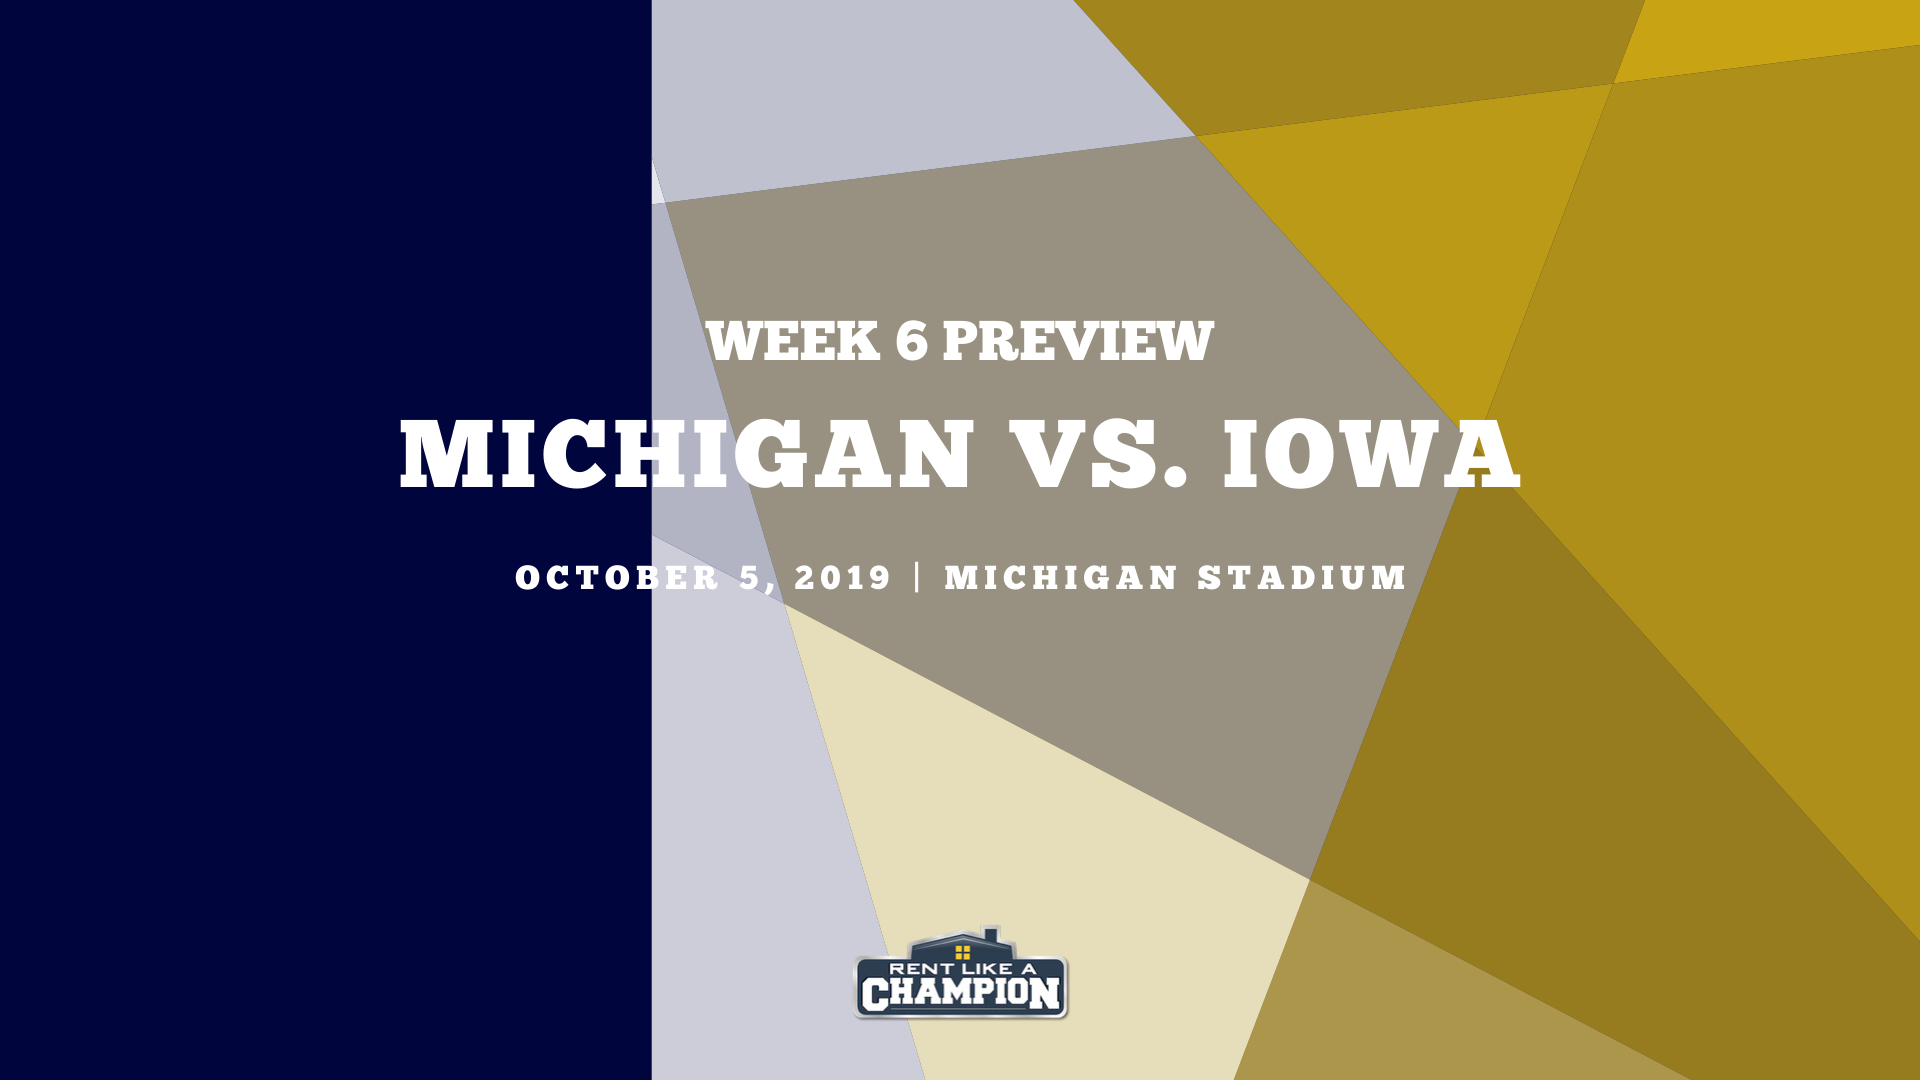 Michigan Game Preview Template (4)